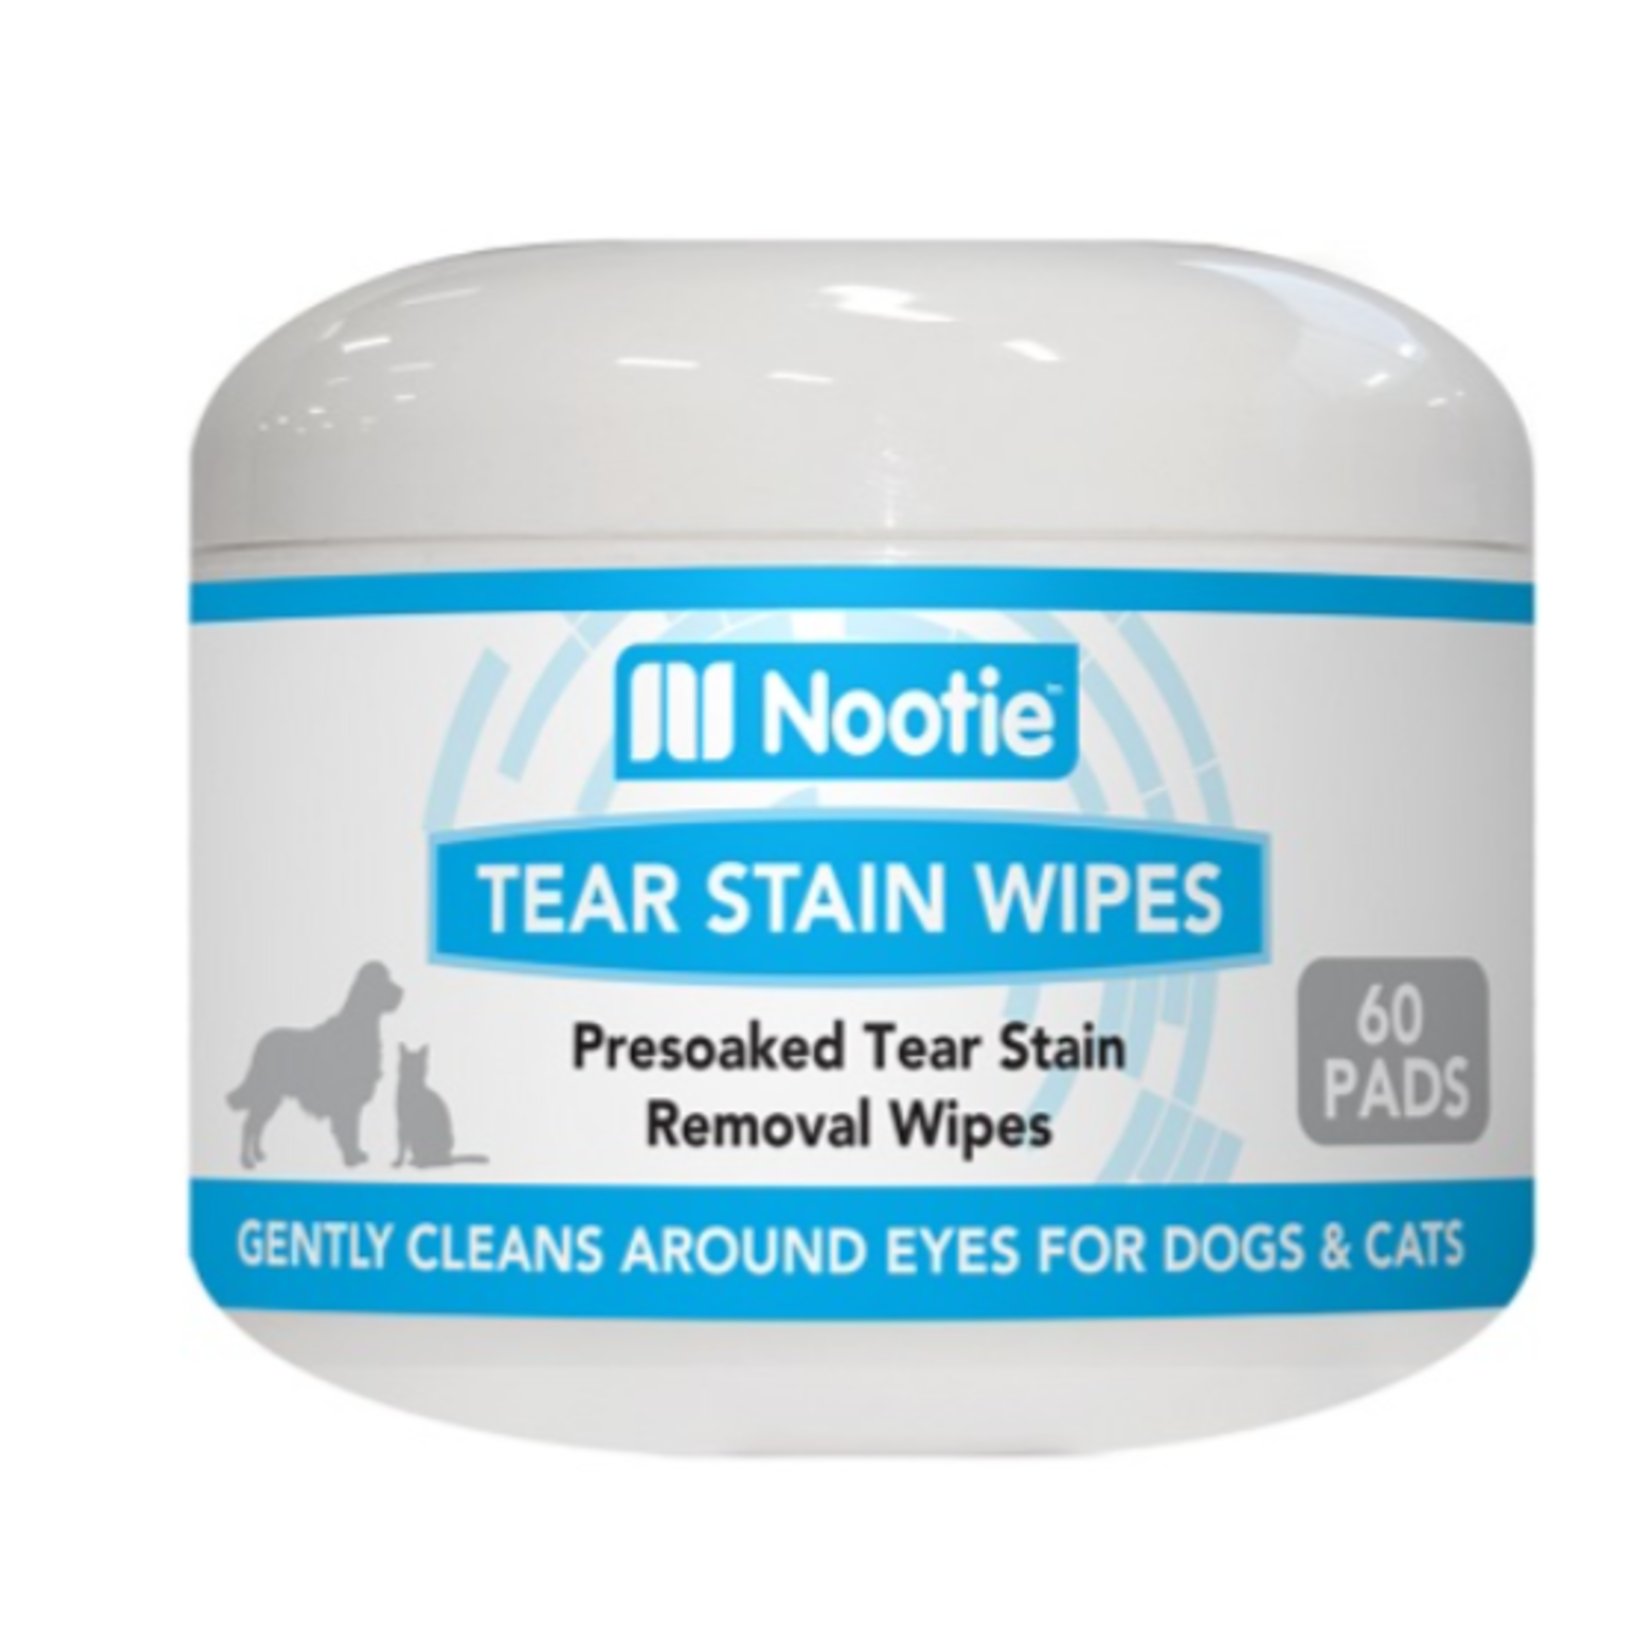 Nootie Wipes - Removes & Prevents Face and Tear Stain - 60 pads